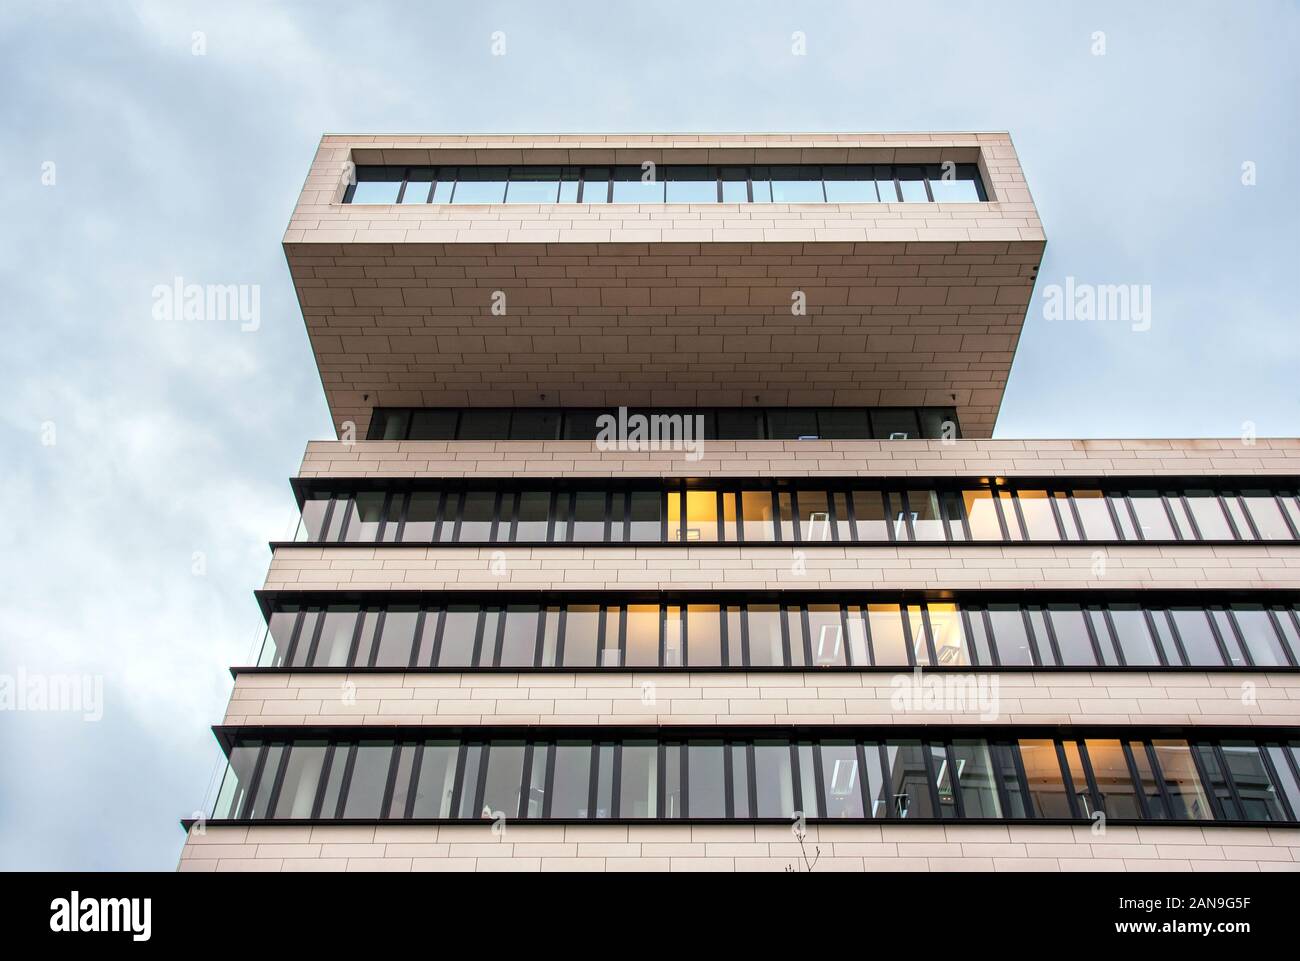 Architecture design of modern office building with balcony on the top, viewed from low angle against cloudy sky Stock Photo